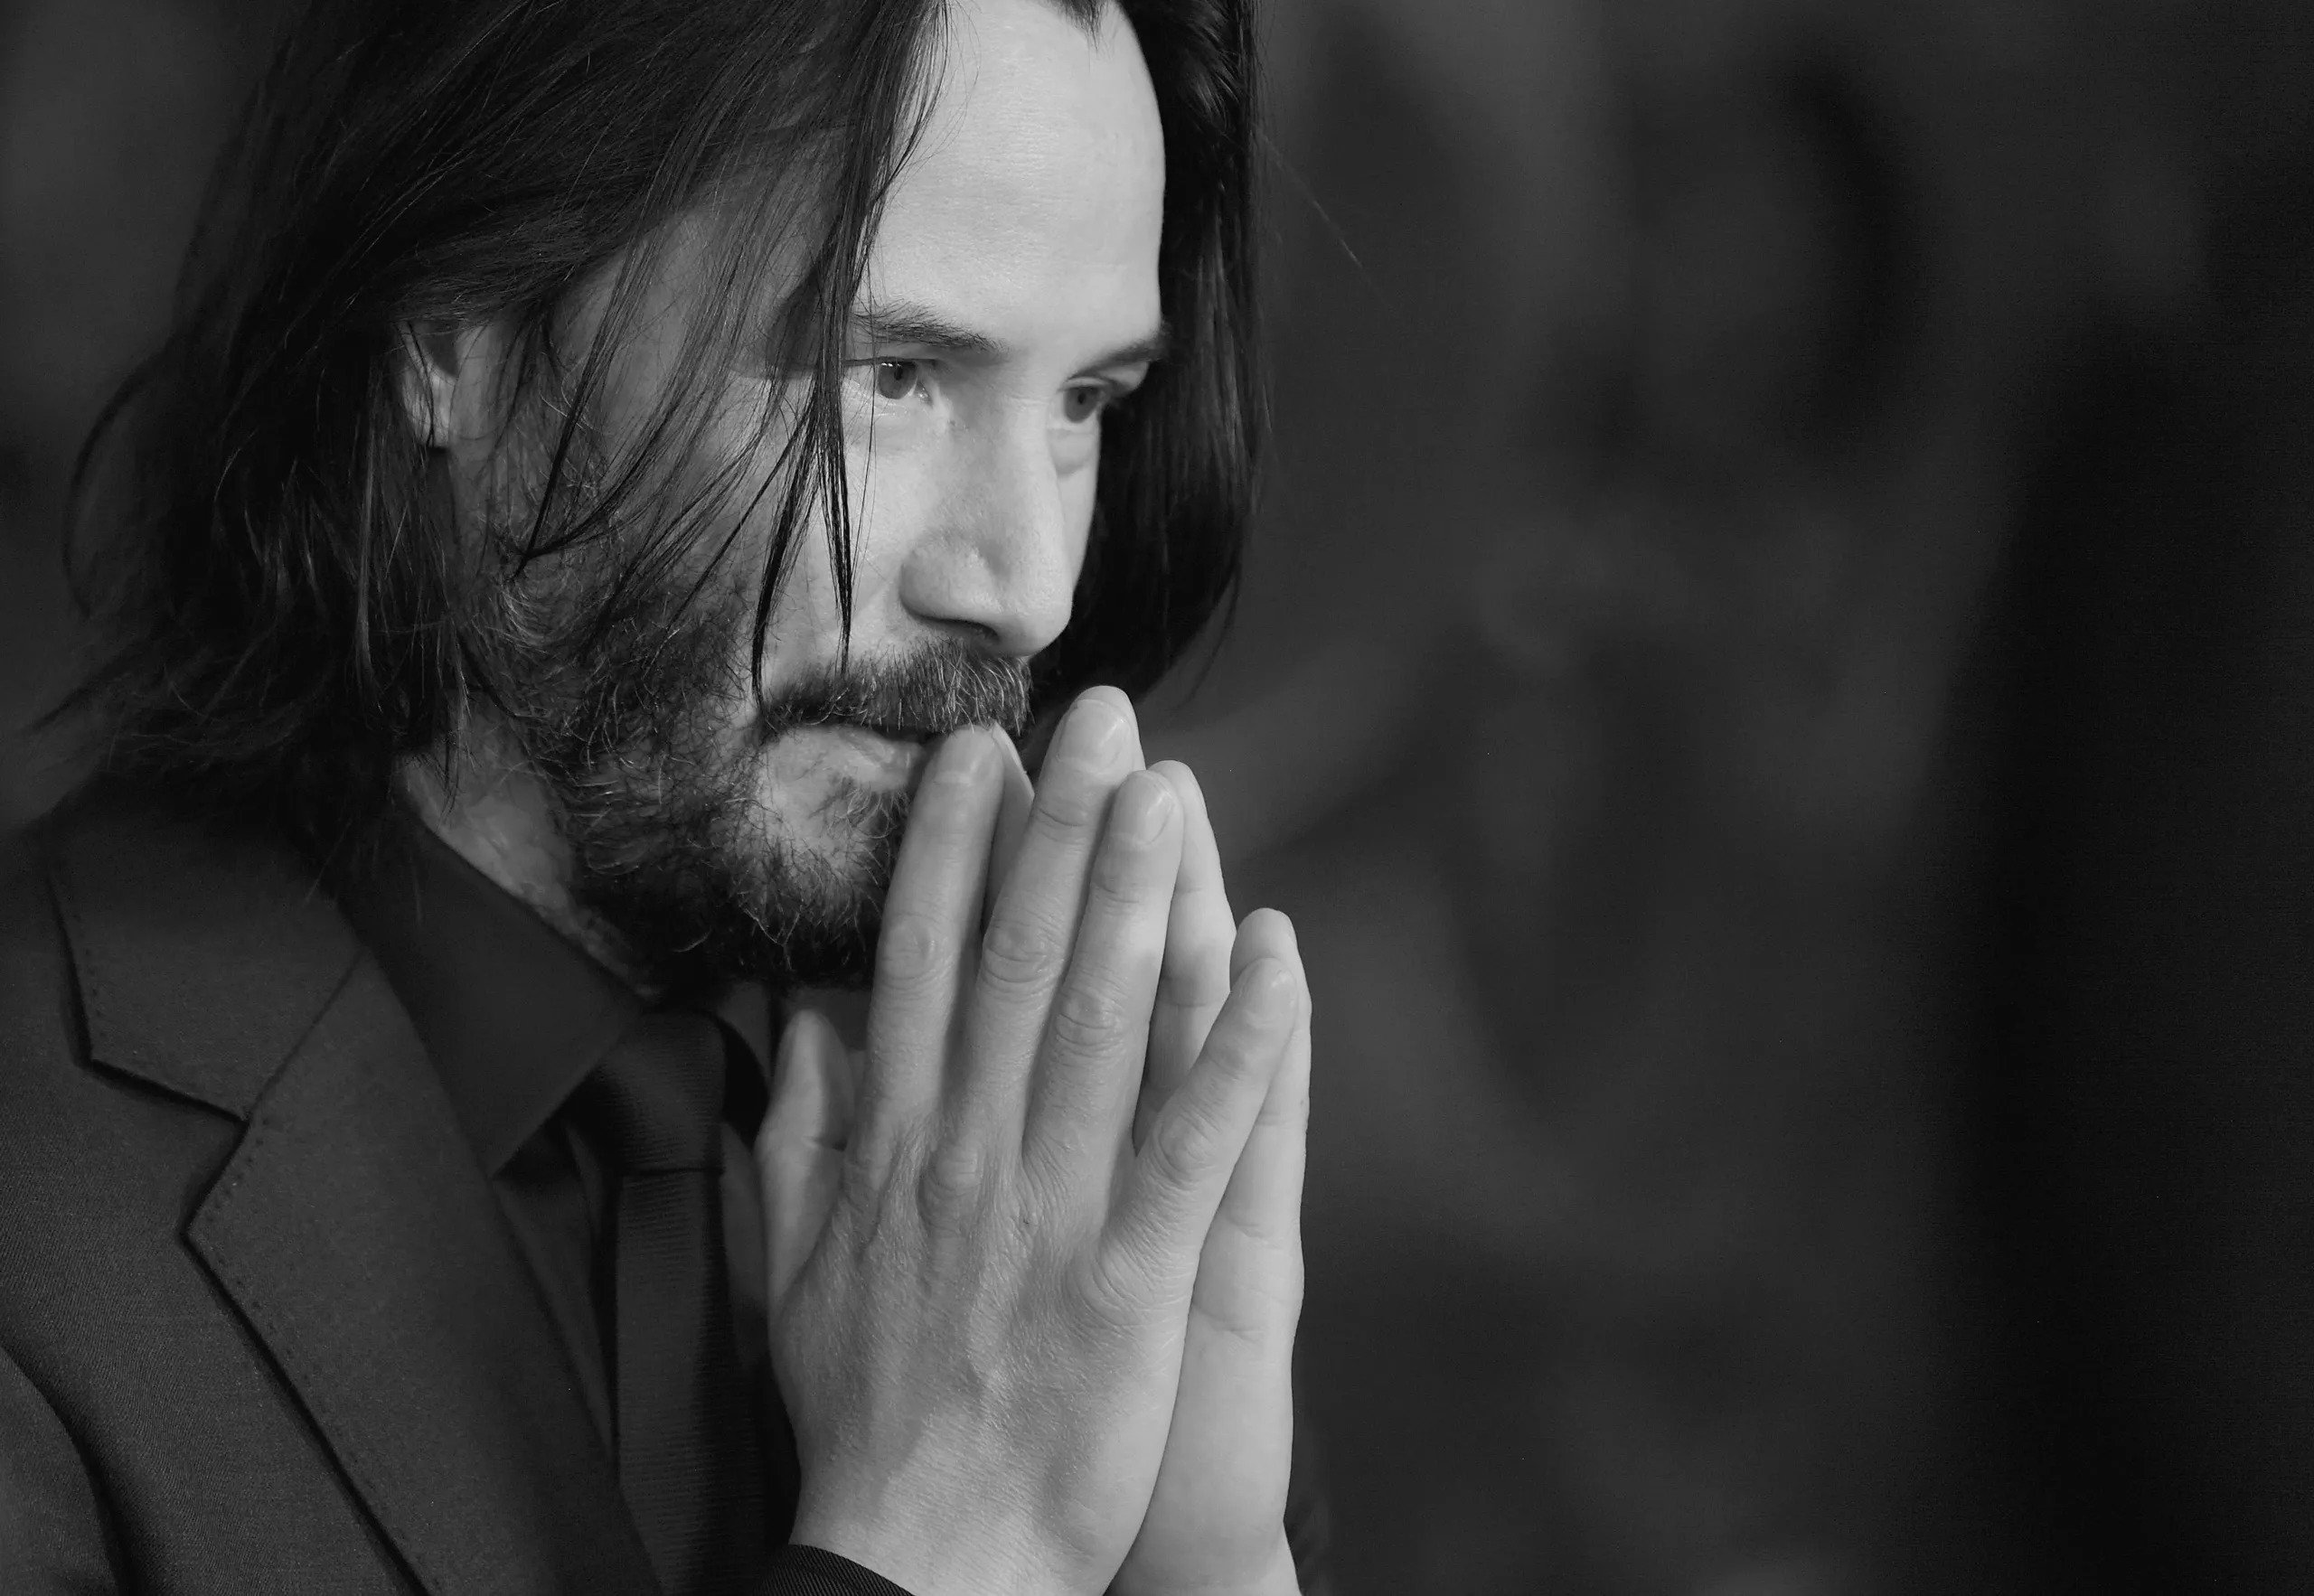 Keanu Reeves wearing a black suit and thinking about something